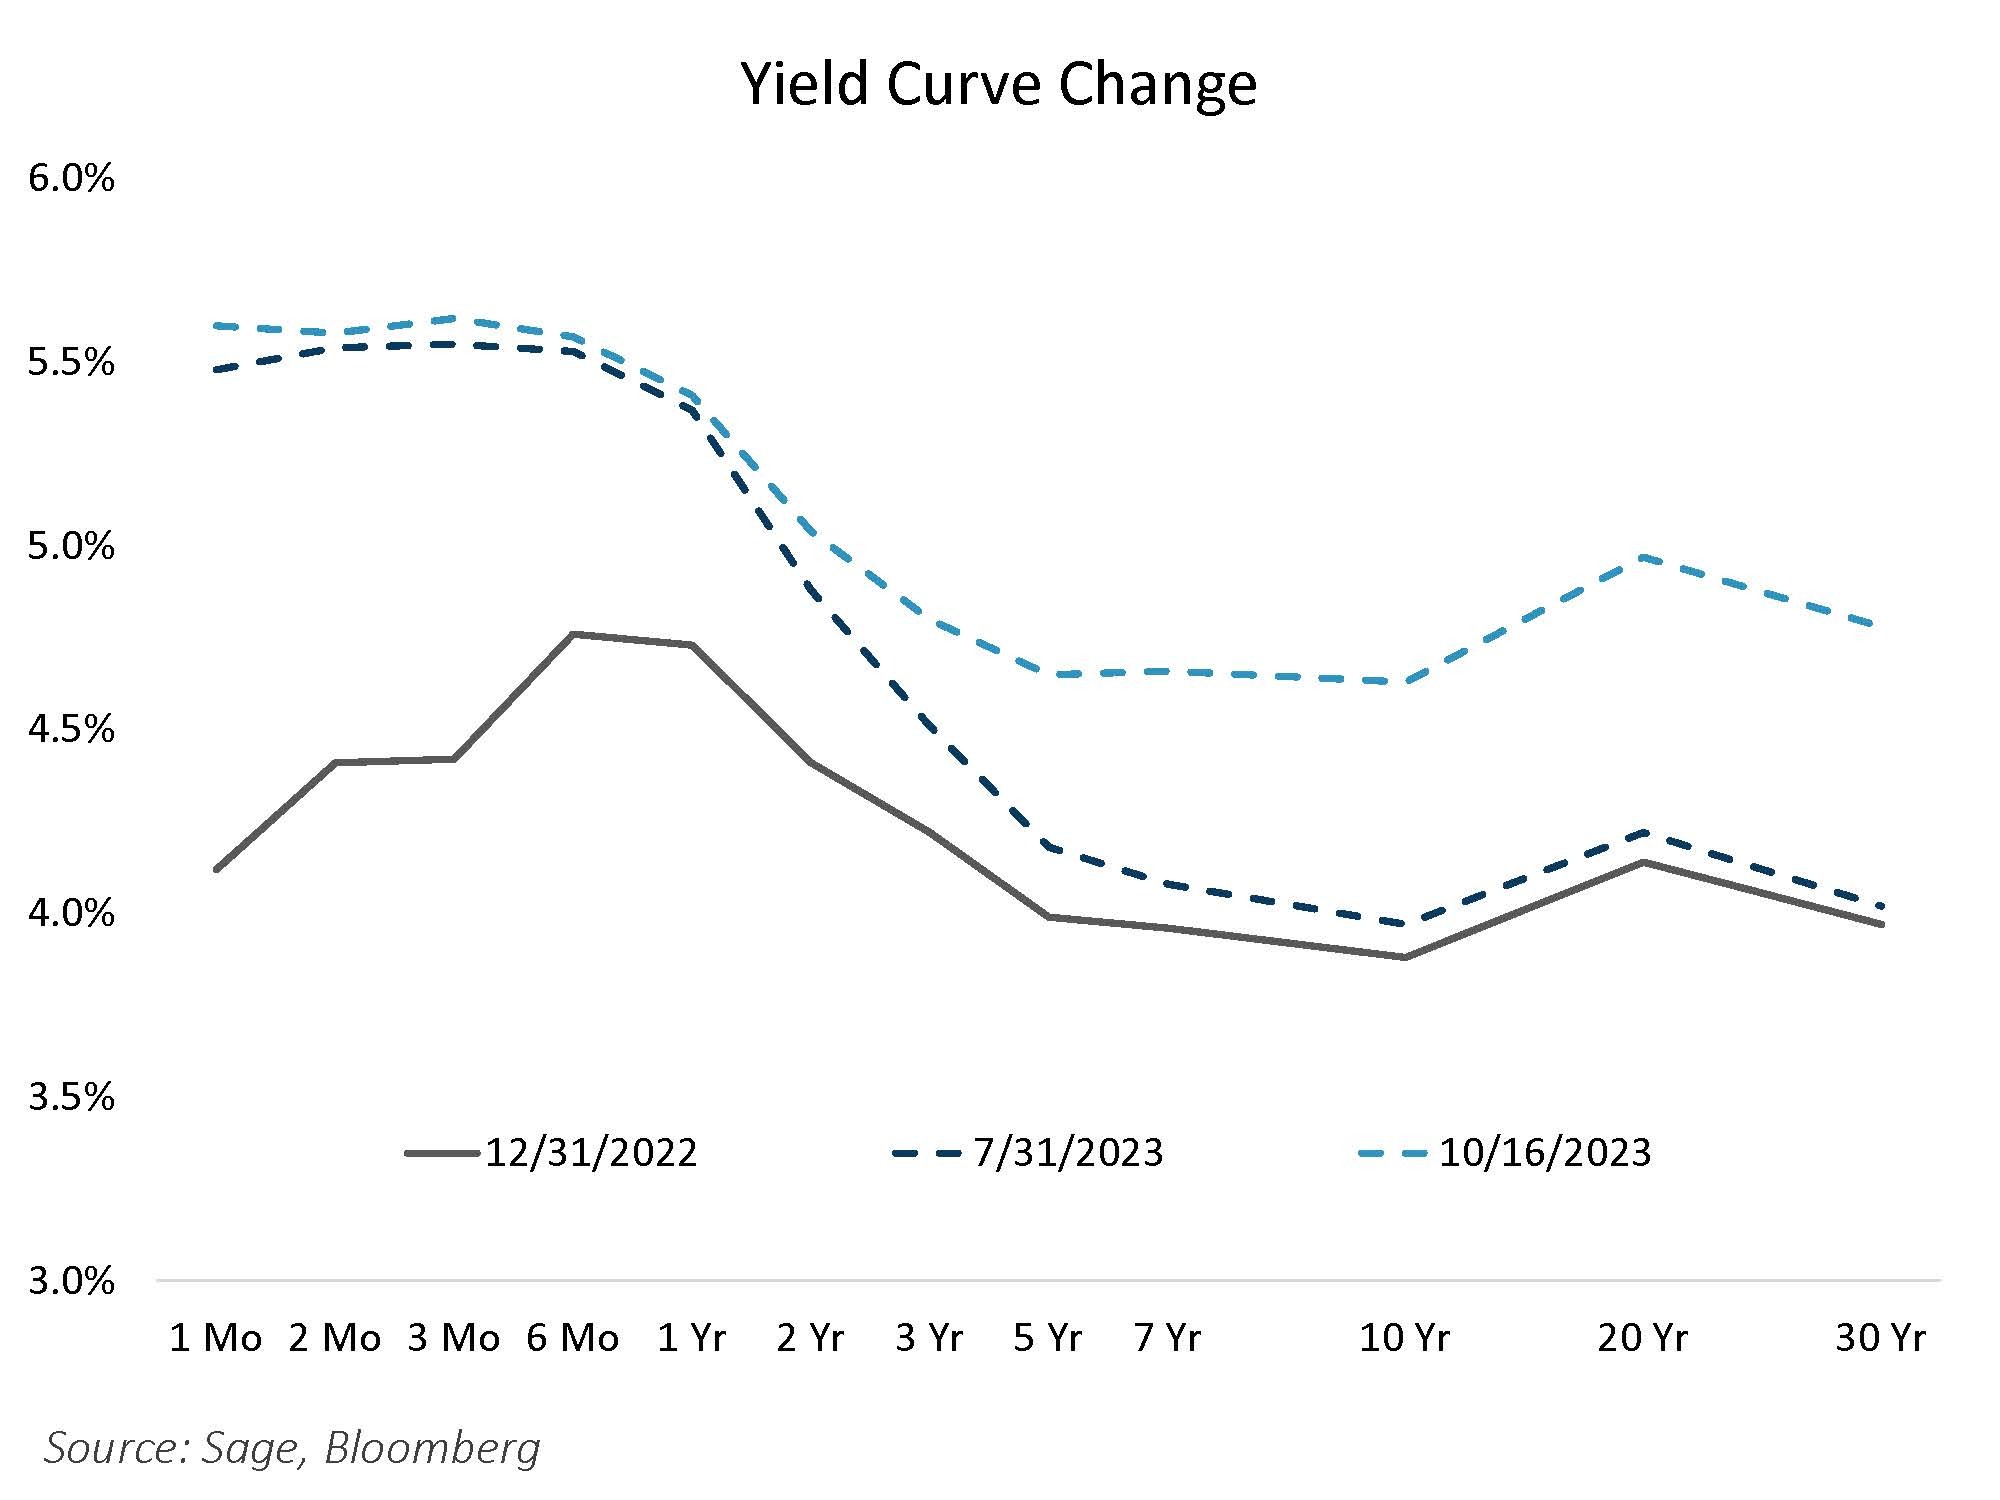 Investor Concern on Yield Curve Change